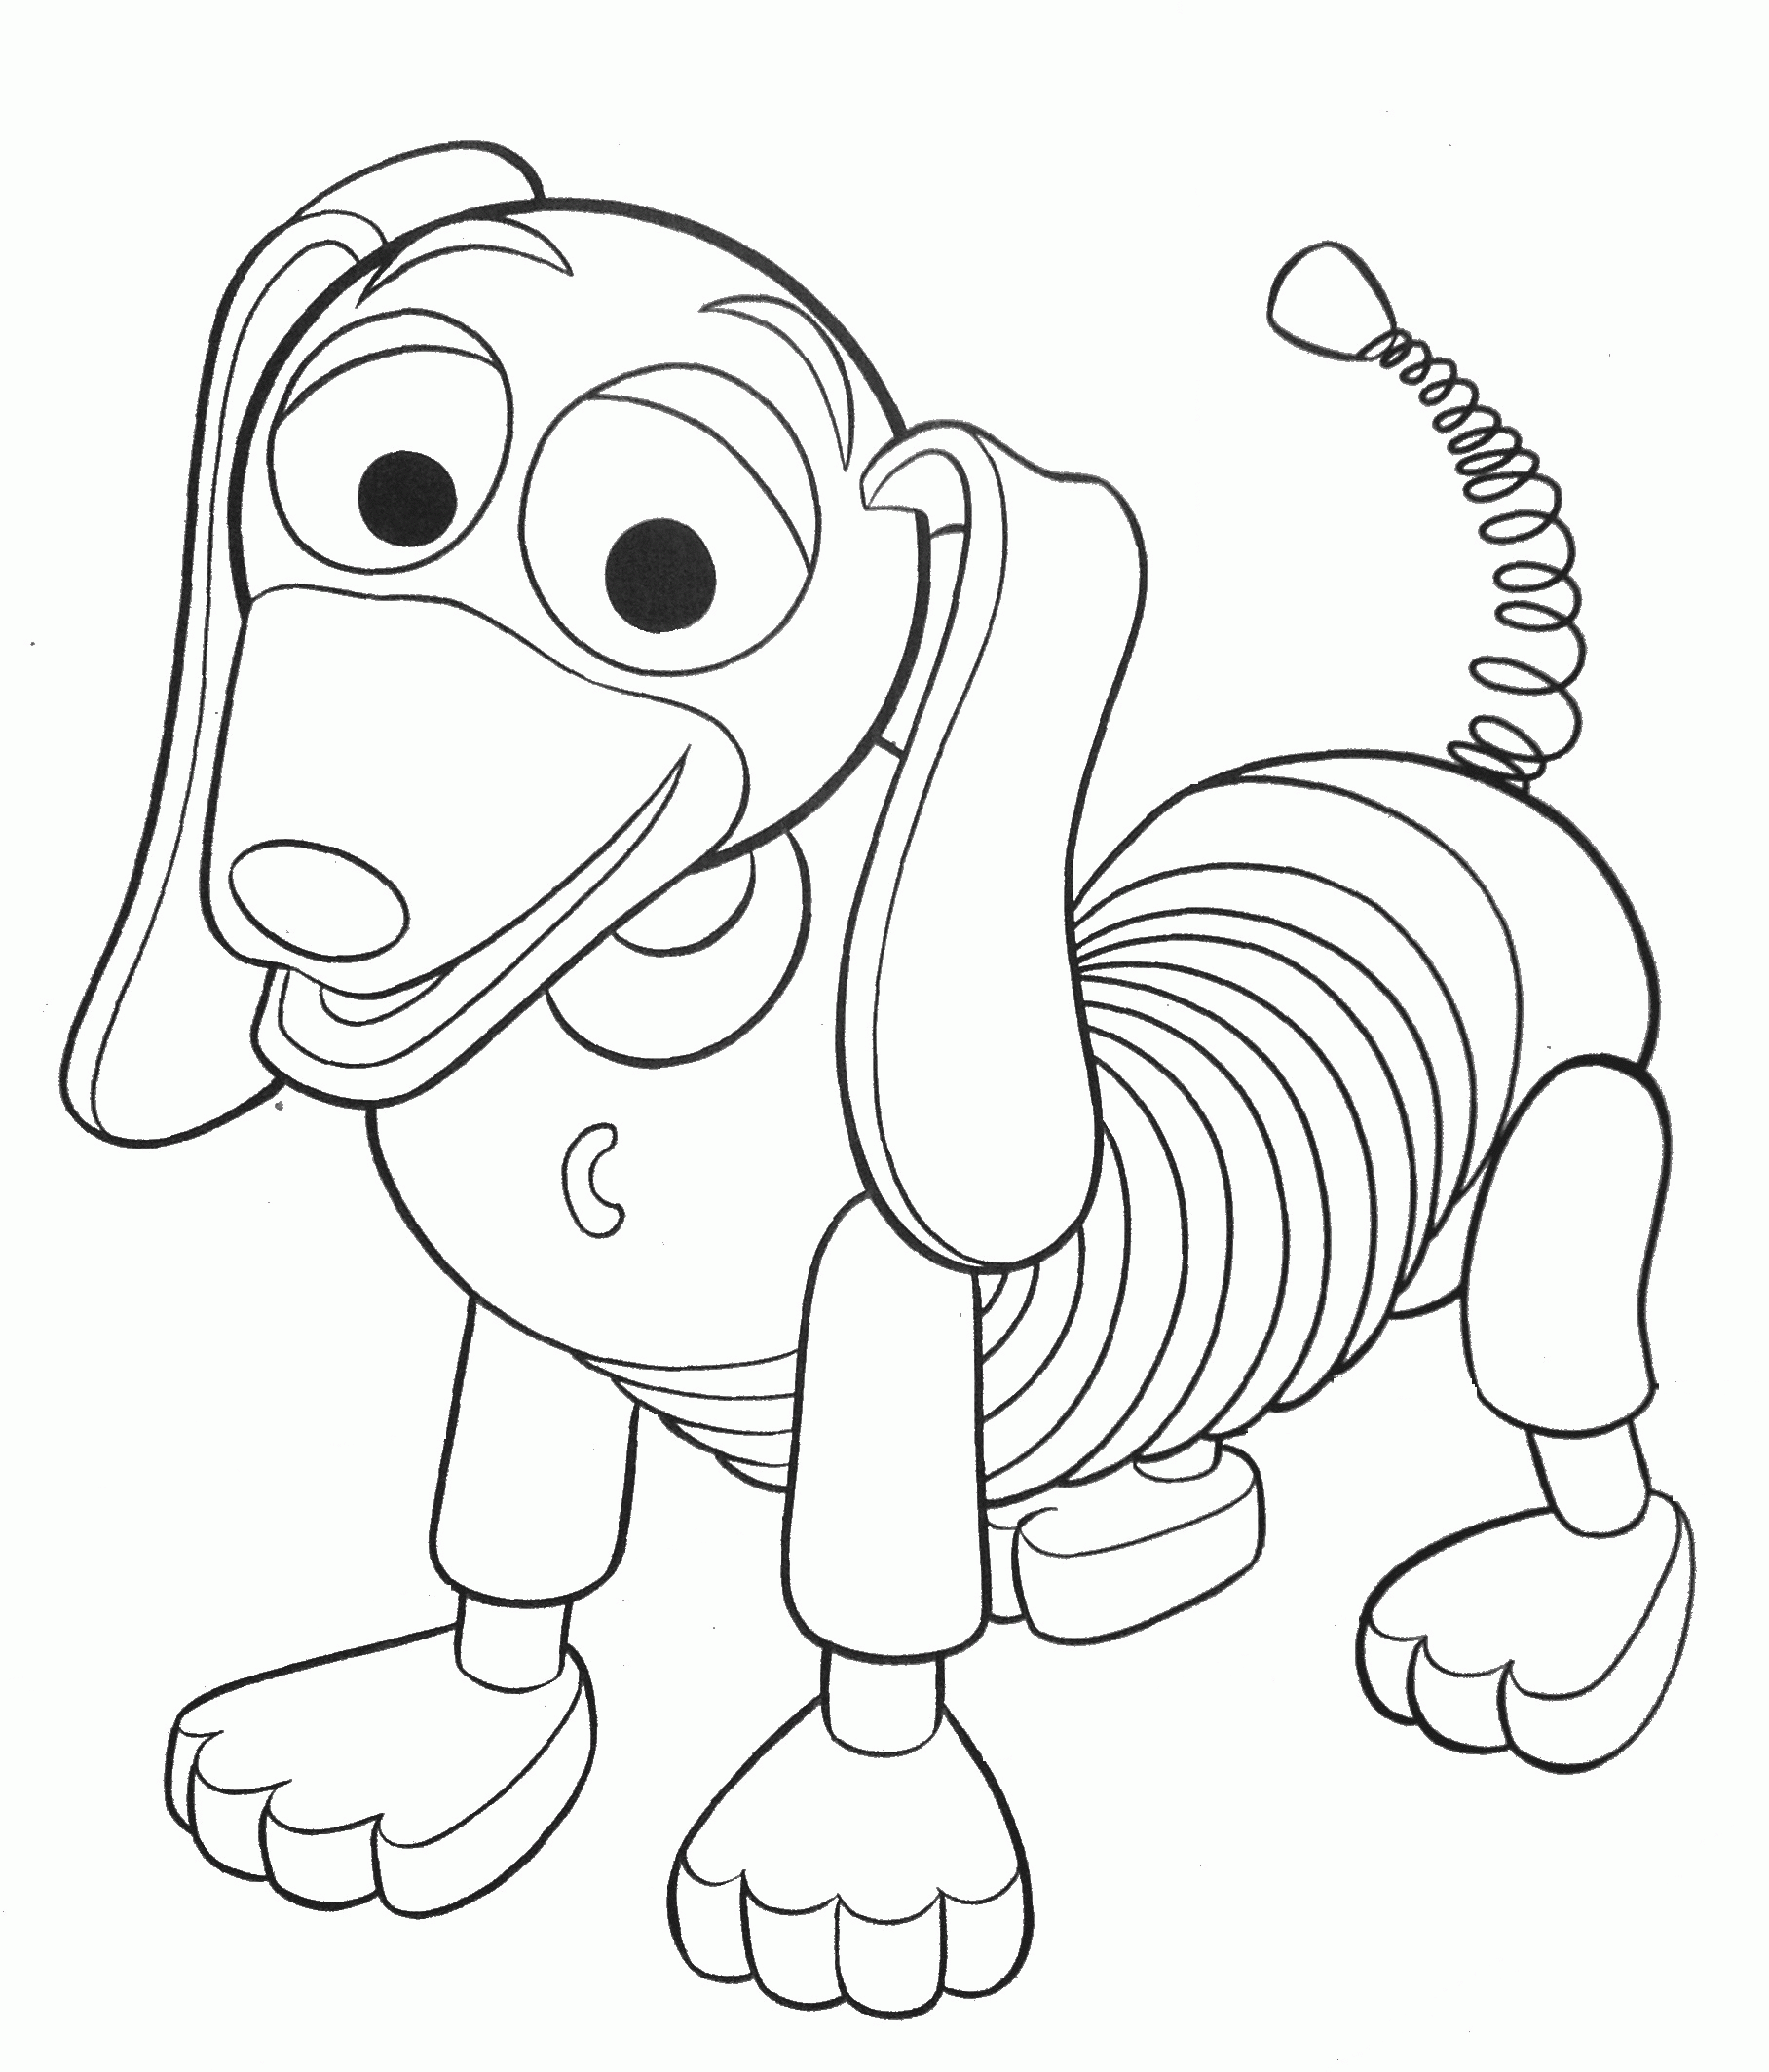 Related Toy Story Coloring Pages item-11702, Toy Story Coloring ...